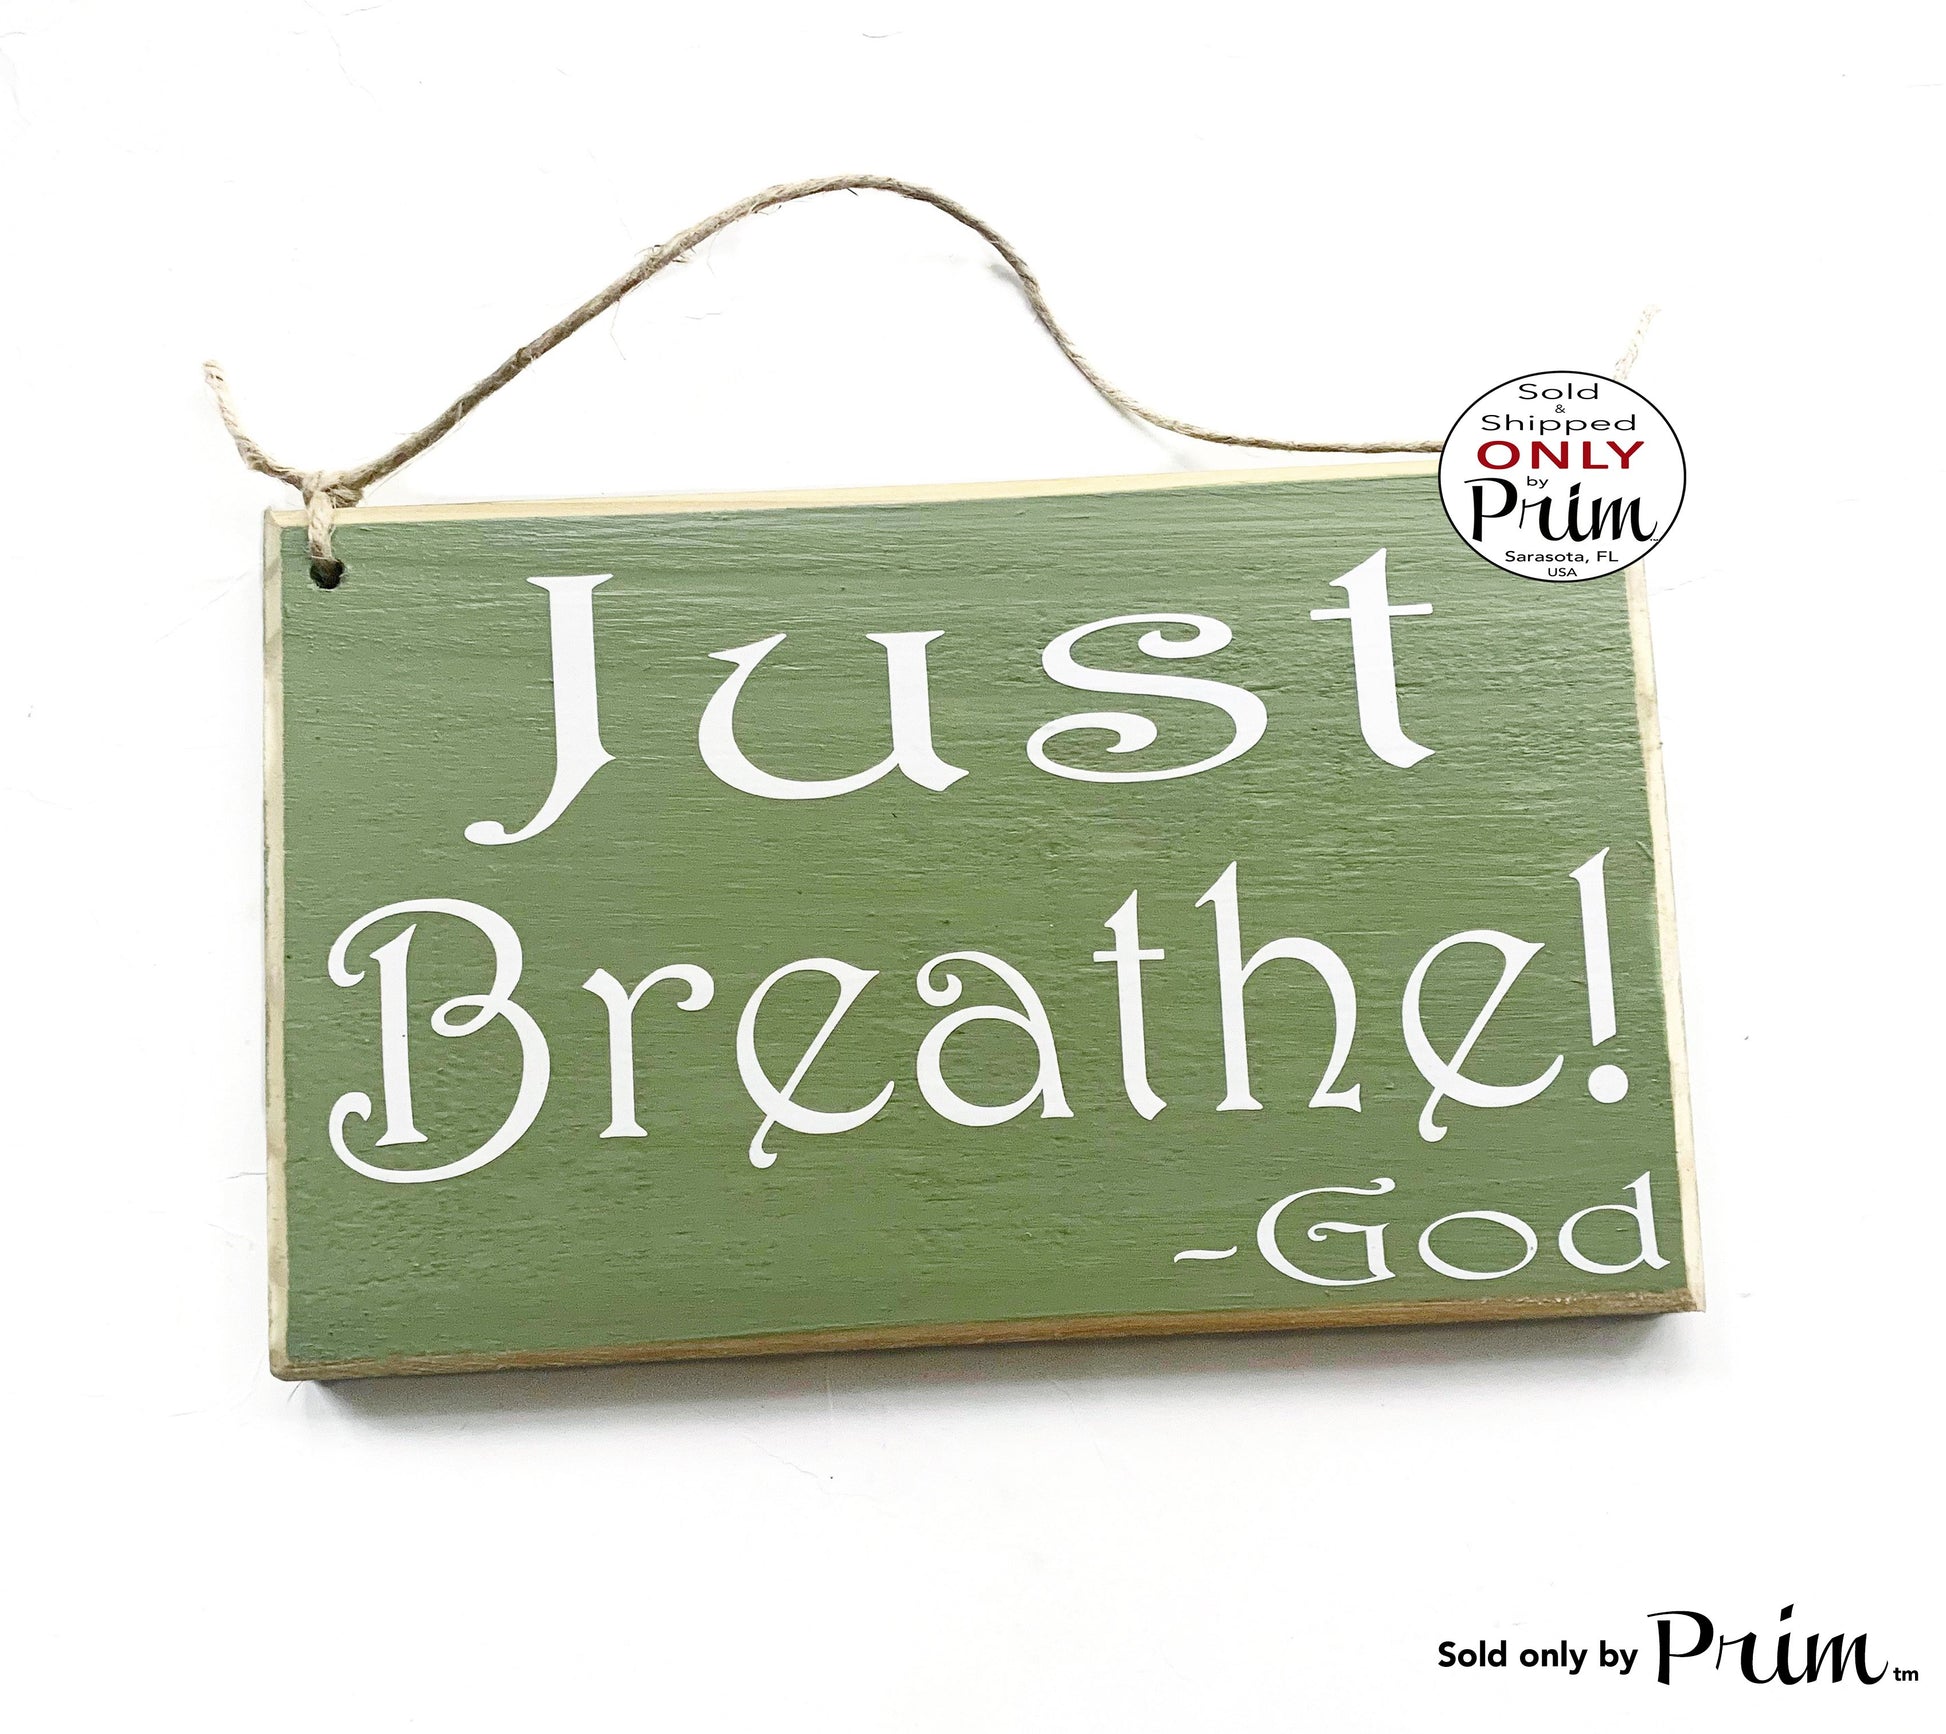 8x6 Just Breathe God Custom Wood Sign | This Too Shall Pass Motivational Inspirational You've Got This Be Strong Wall Hanger Door Plaque